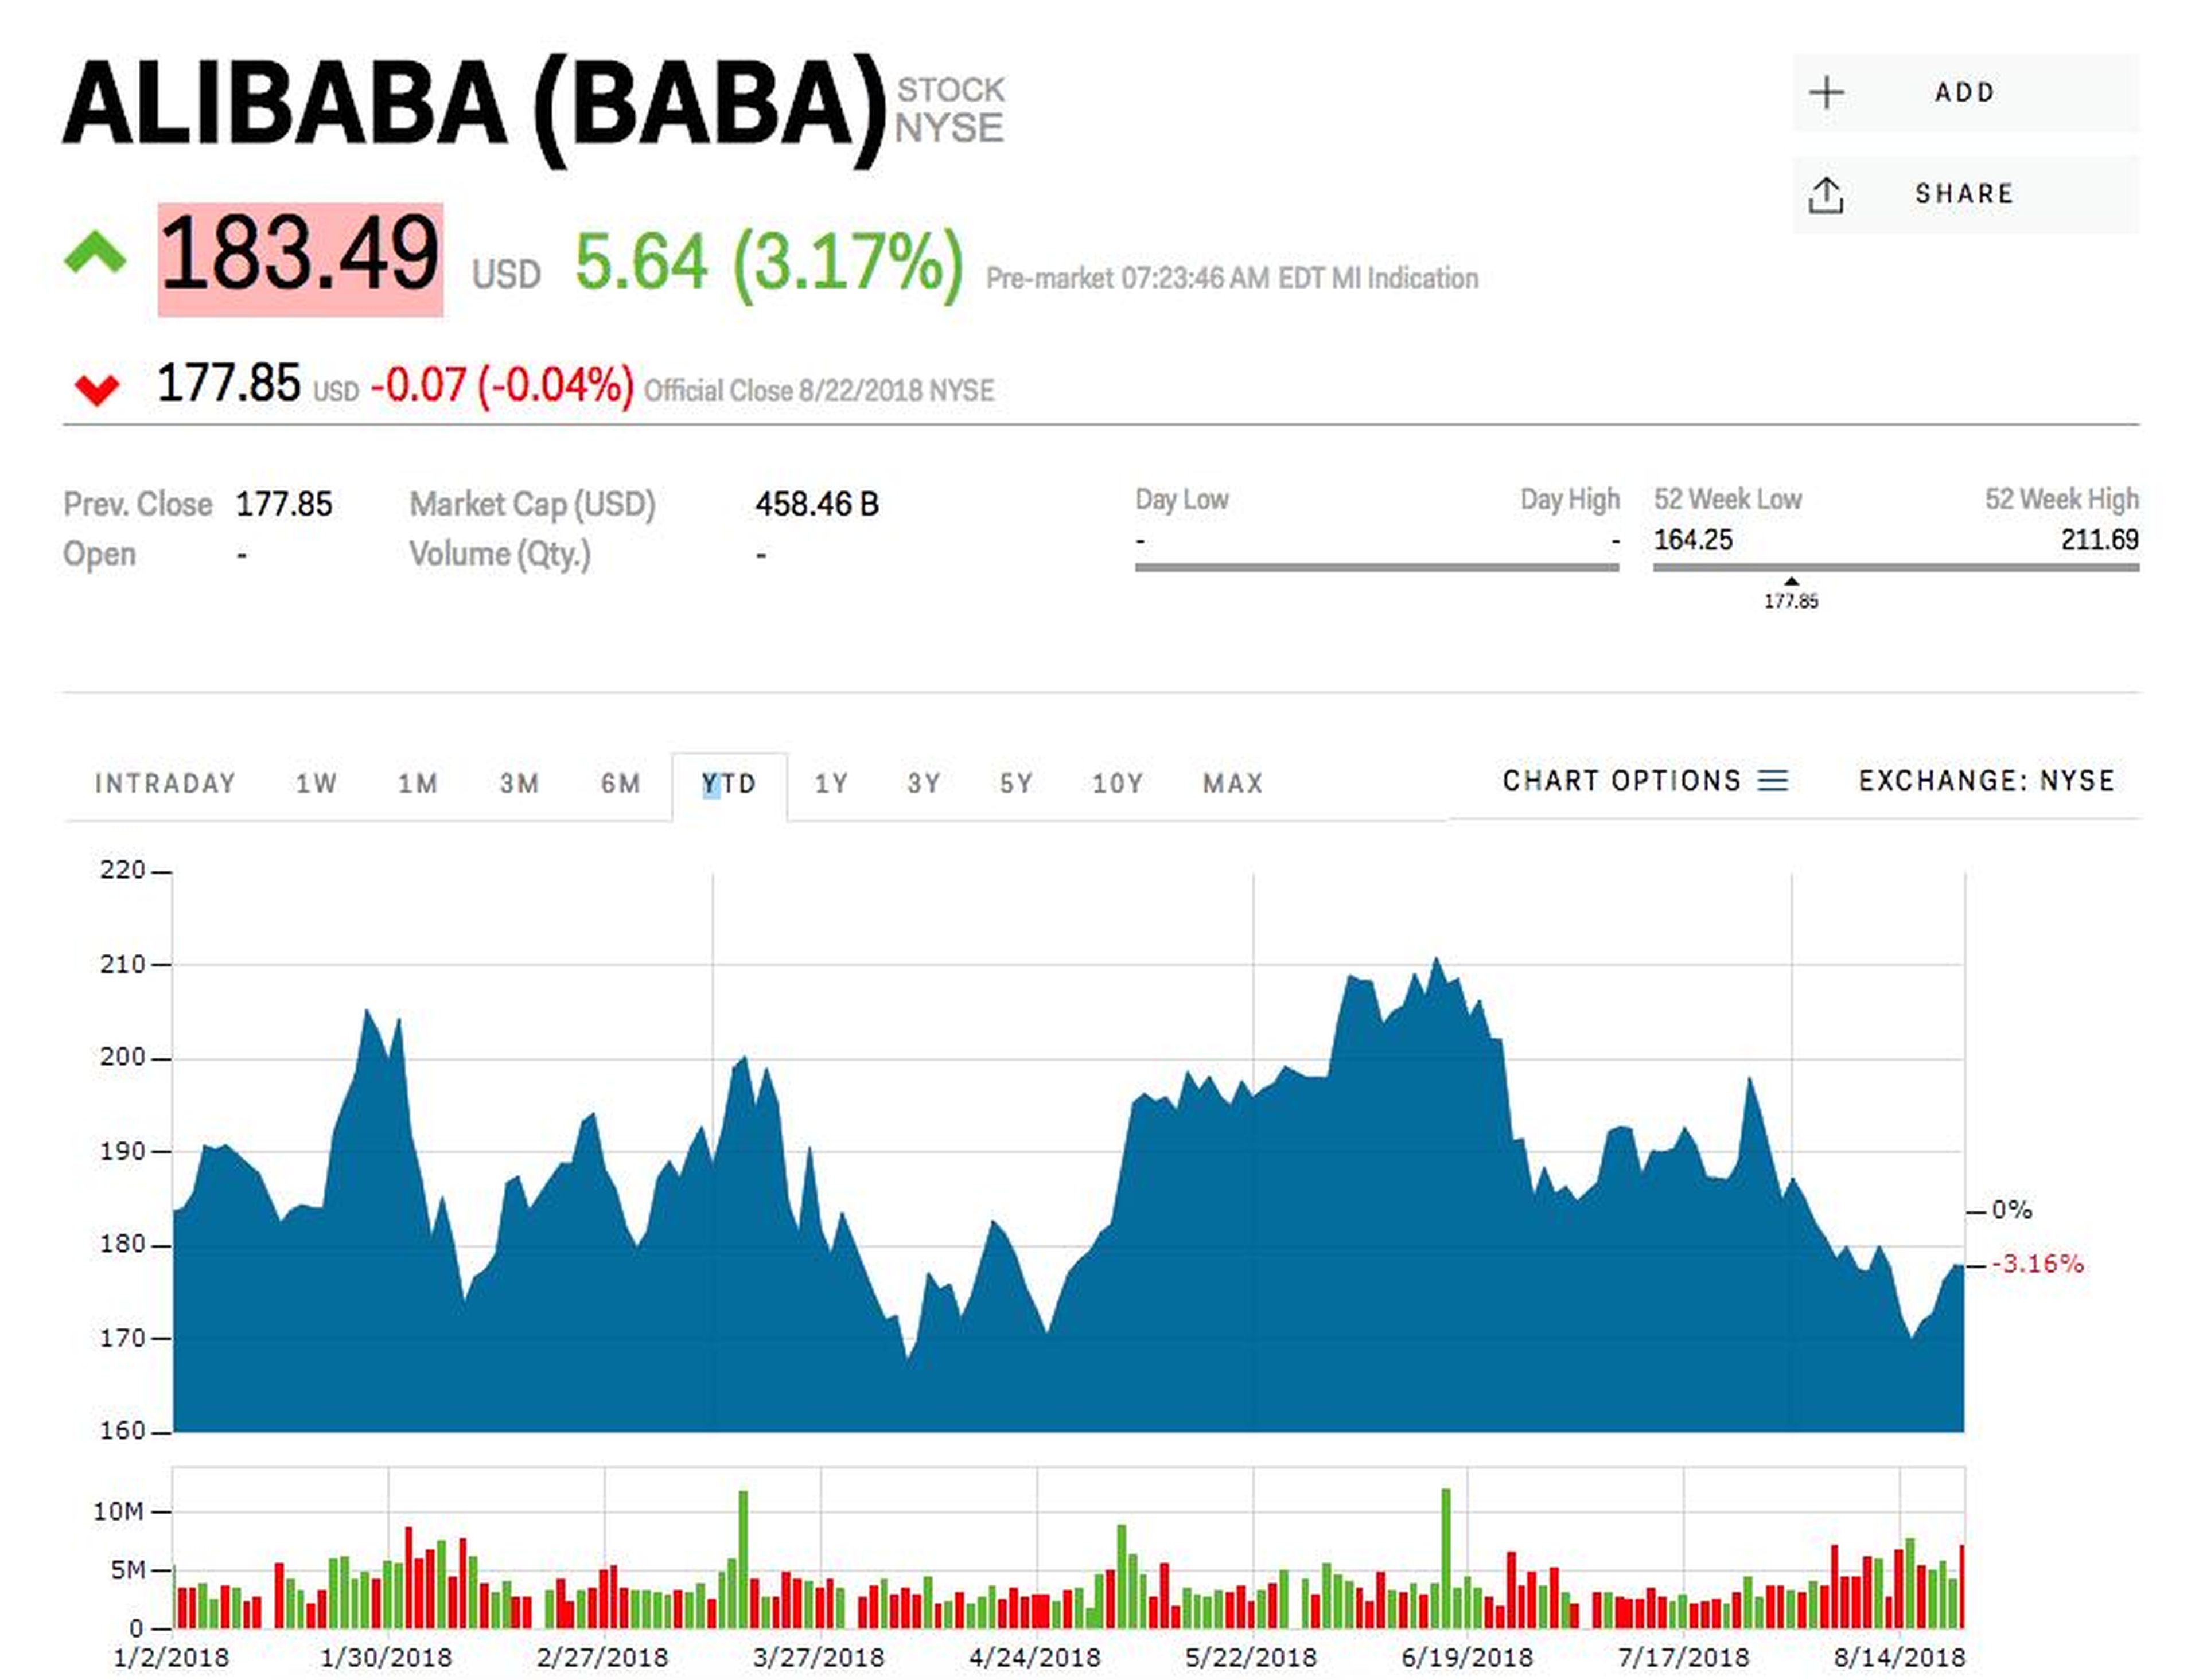 Alibaba revenue soars 61%, topping the FAANG + BAT group